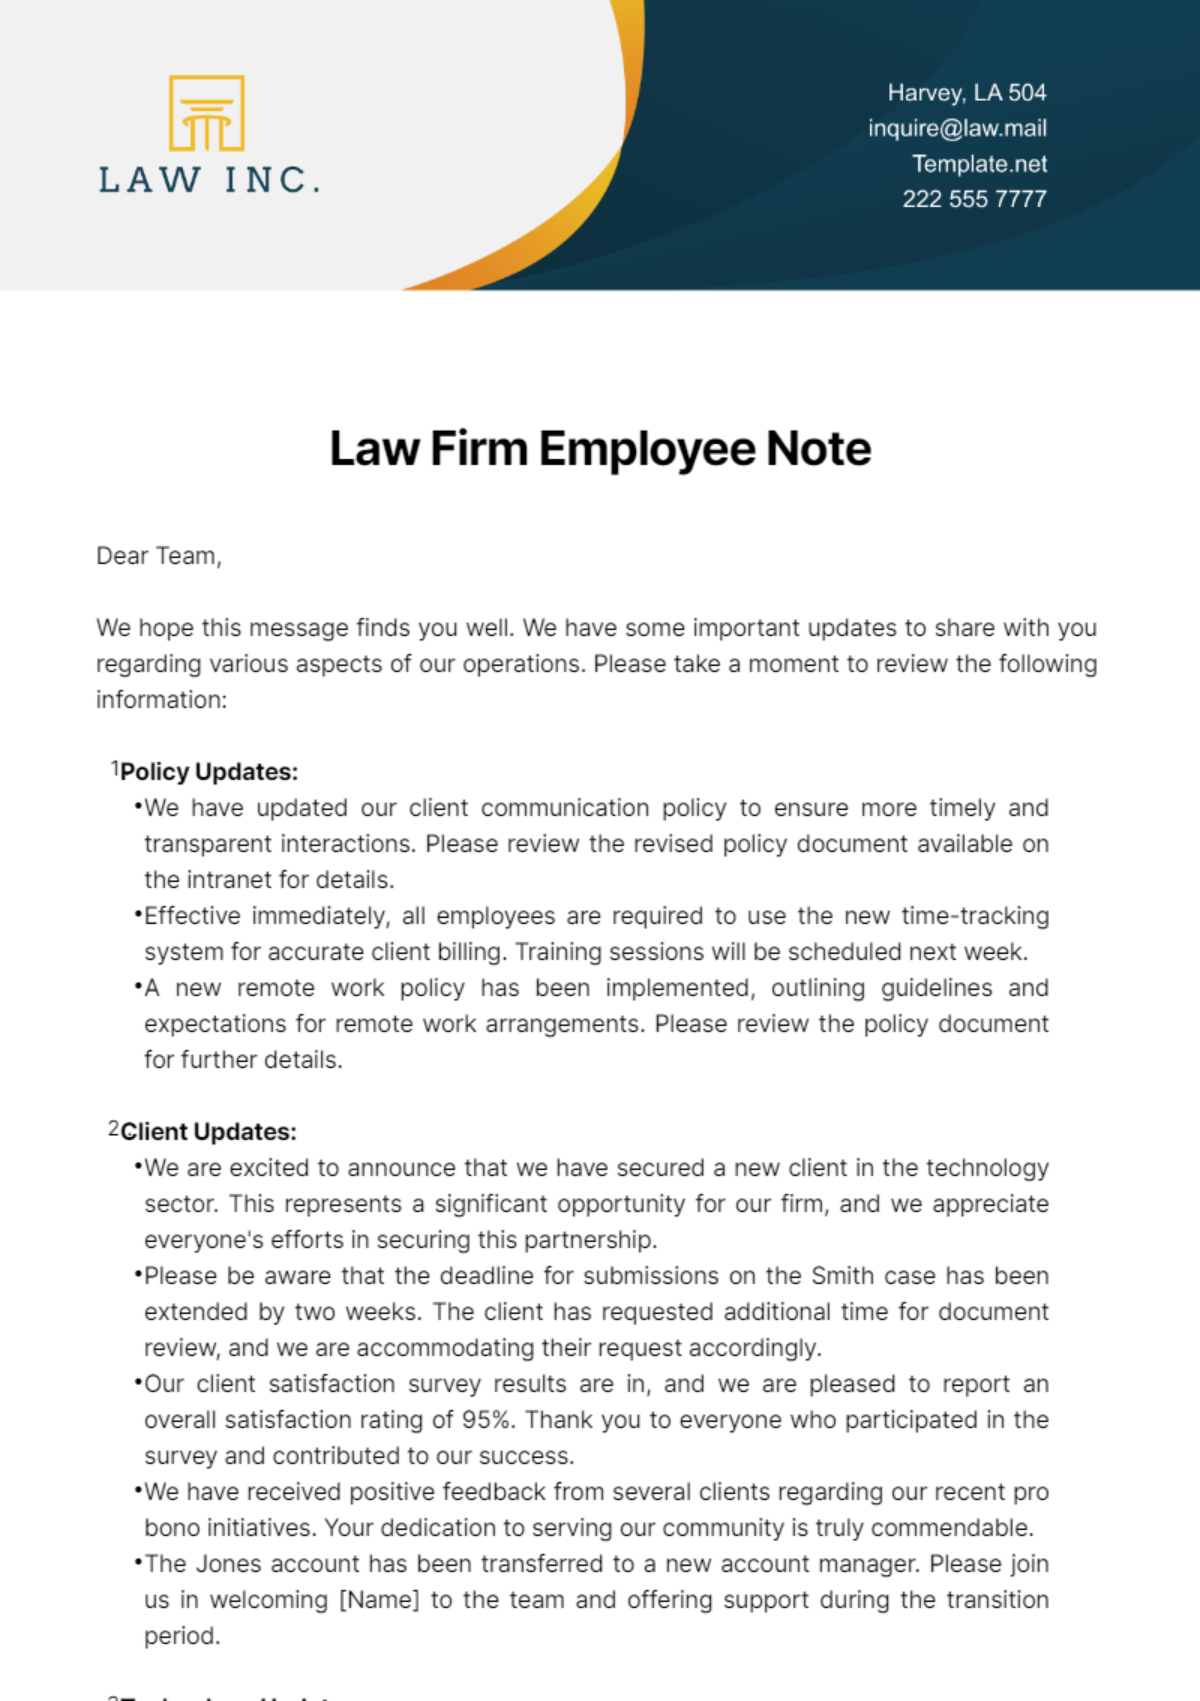 Law Firm Employee Note Template